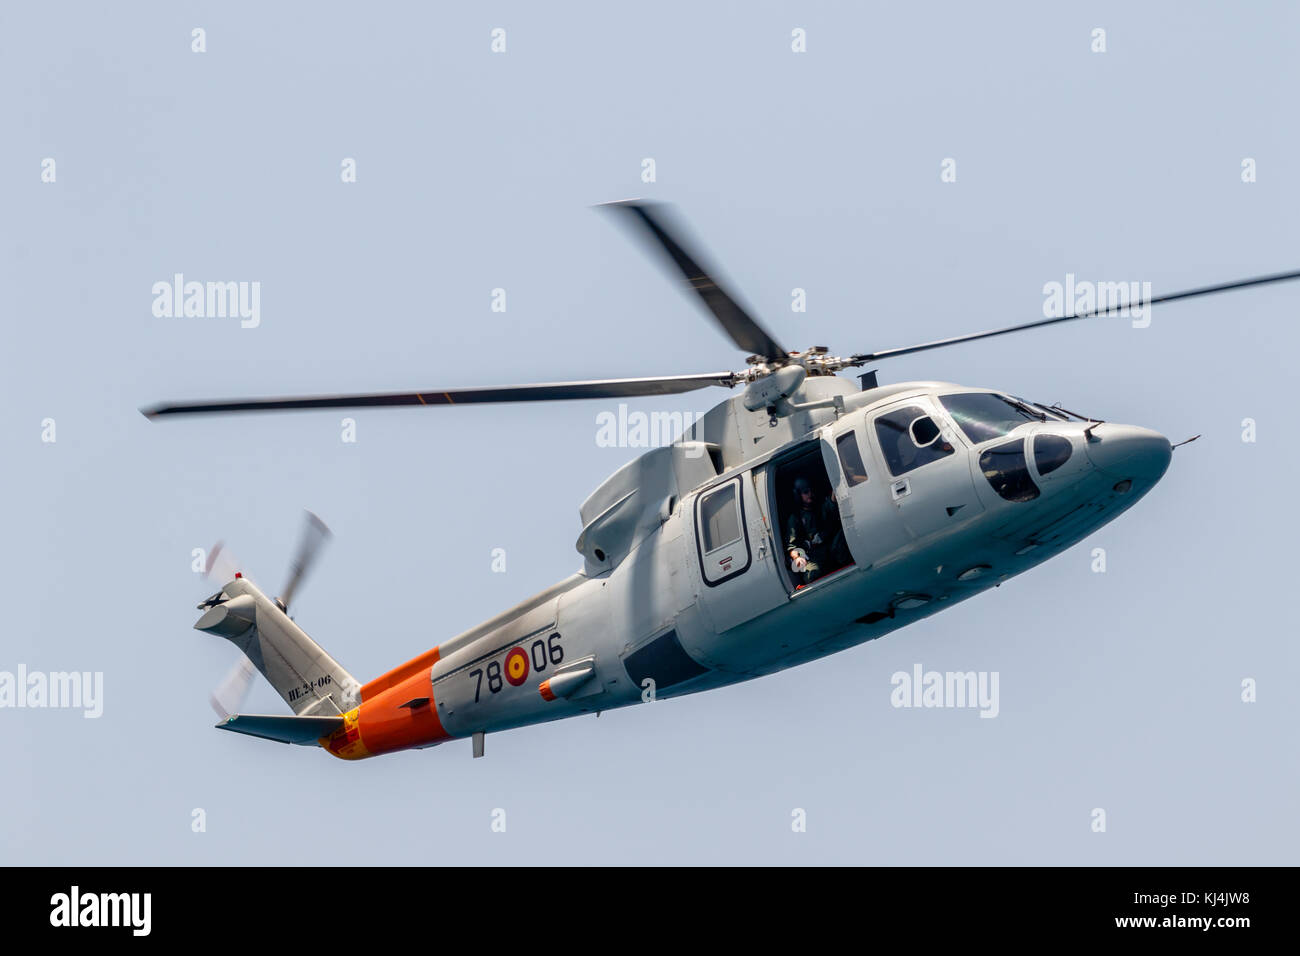 MOTRIL, GRANADA, SPAIN-JUN 11: Helicopter Sikorsky S-76C taking part in an exhibition on the 12th international airshow of Motril on Jun 11, 2017, in  Stock Photo